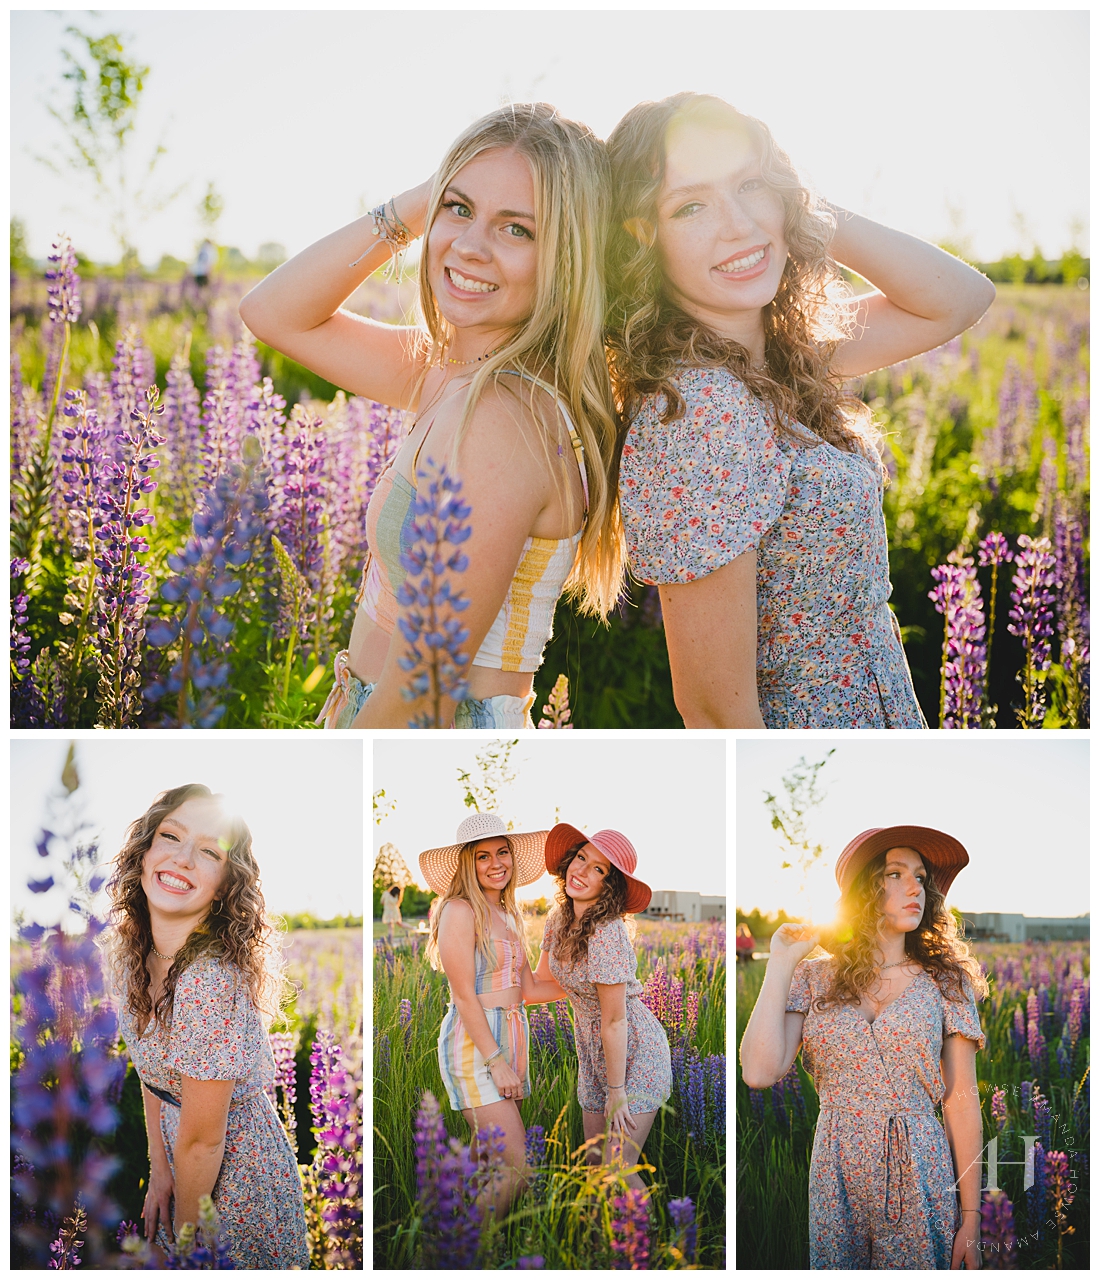 Sunny Portraits in a Field of Flowers | Cute Hats and Accessories for Summer Senior Portraits, How to Style Outdoor Portrait Sessions, Hair and Makeup Ideas for High School Seniors | Photographed by Tacoma Senior Photographer Amanda Howse